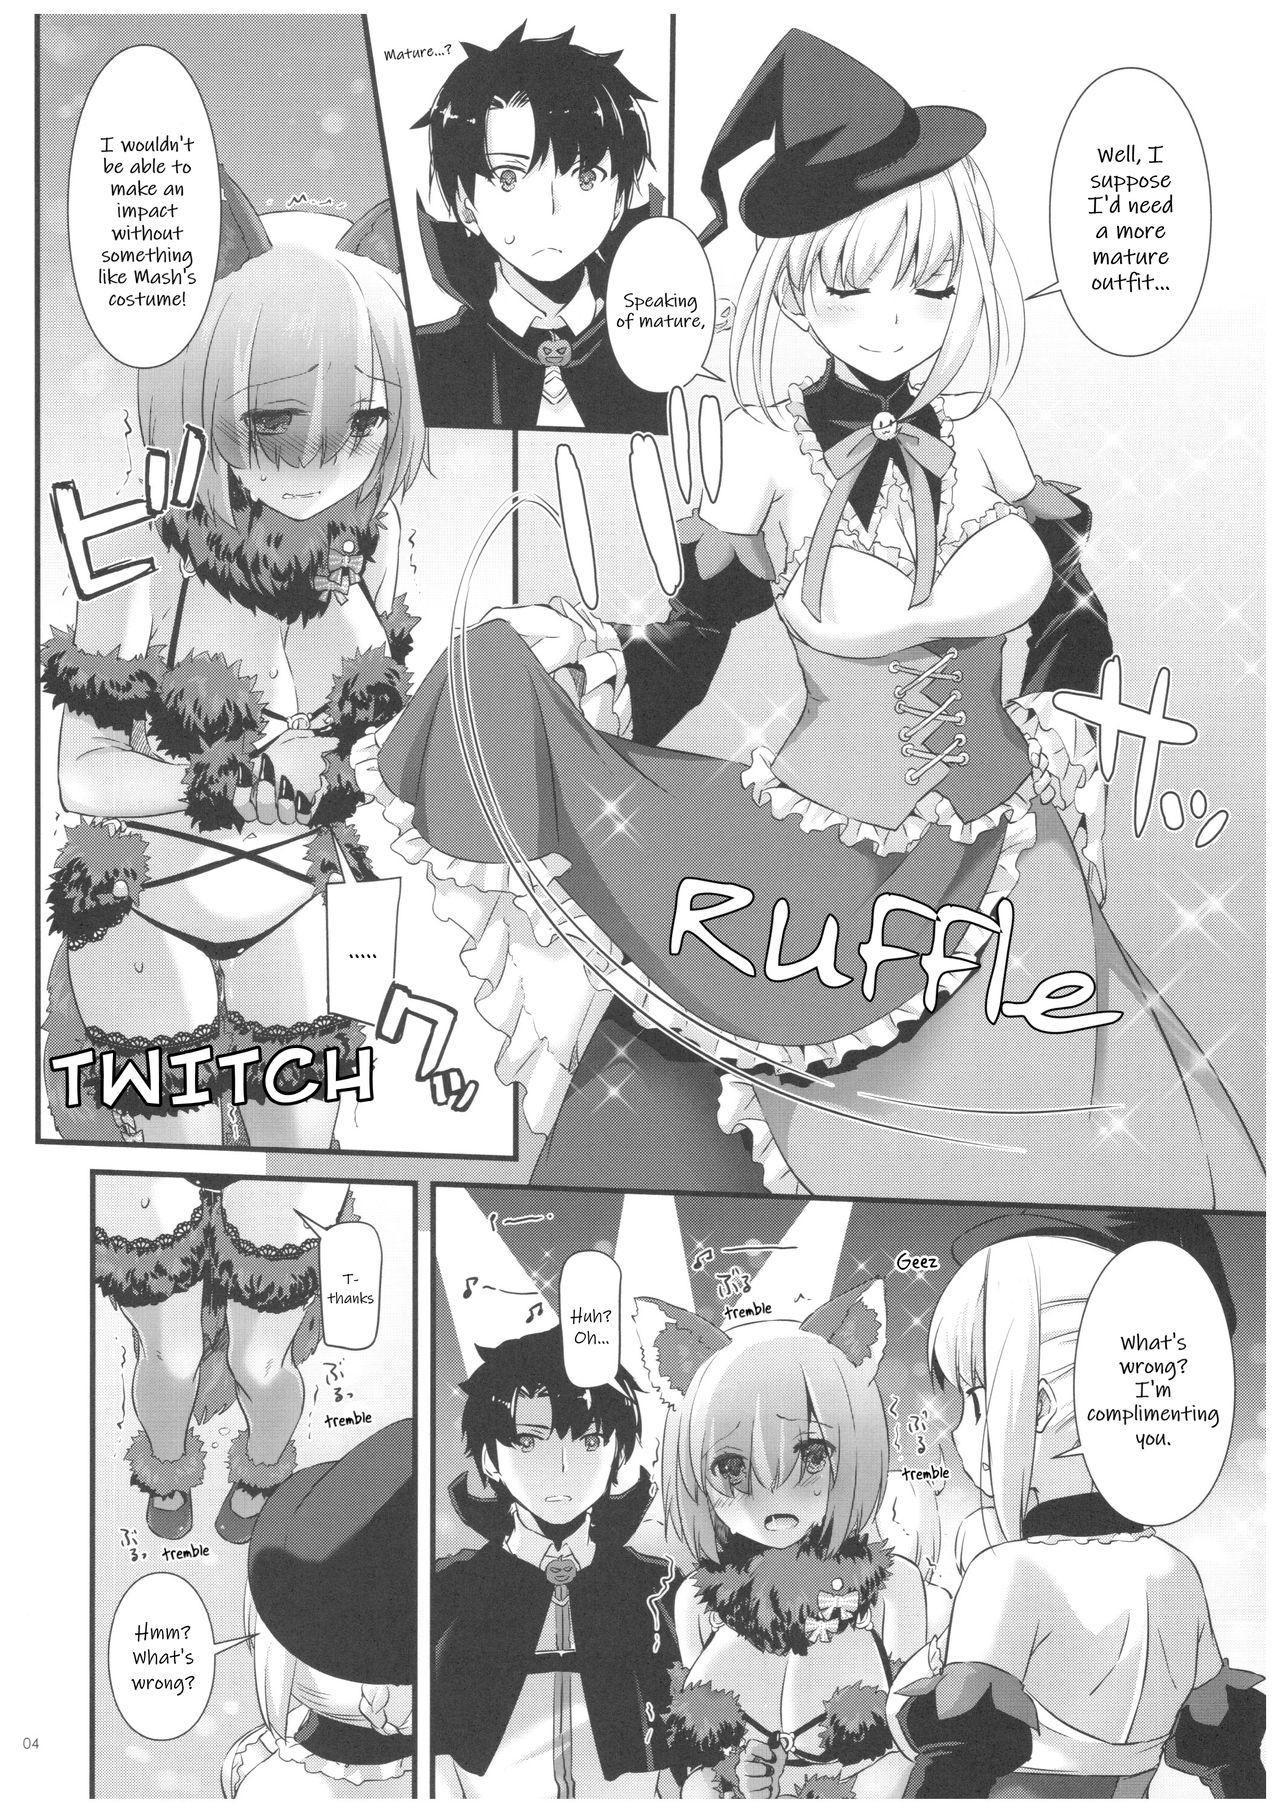 Nylons D.L. action 118 - Fate grand order Exposed - Page 4